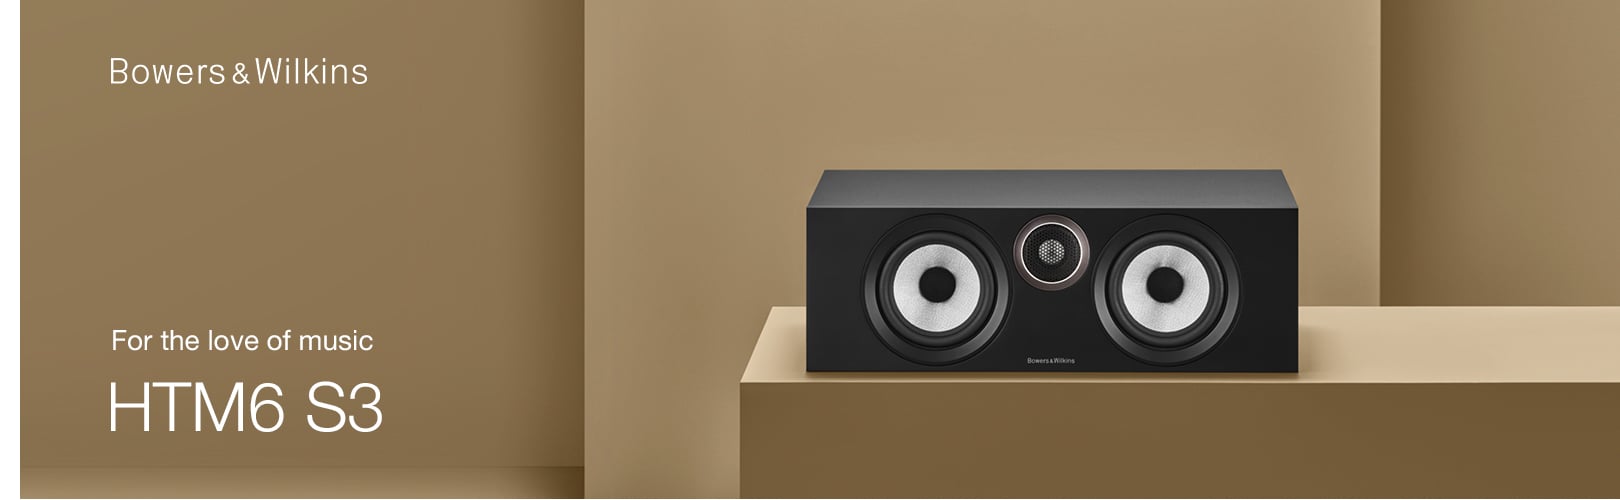 Bowers & Wilkins - For the love of music - HTM6 S3